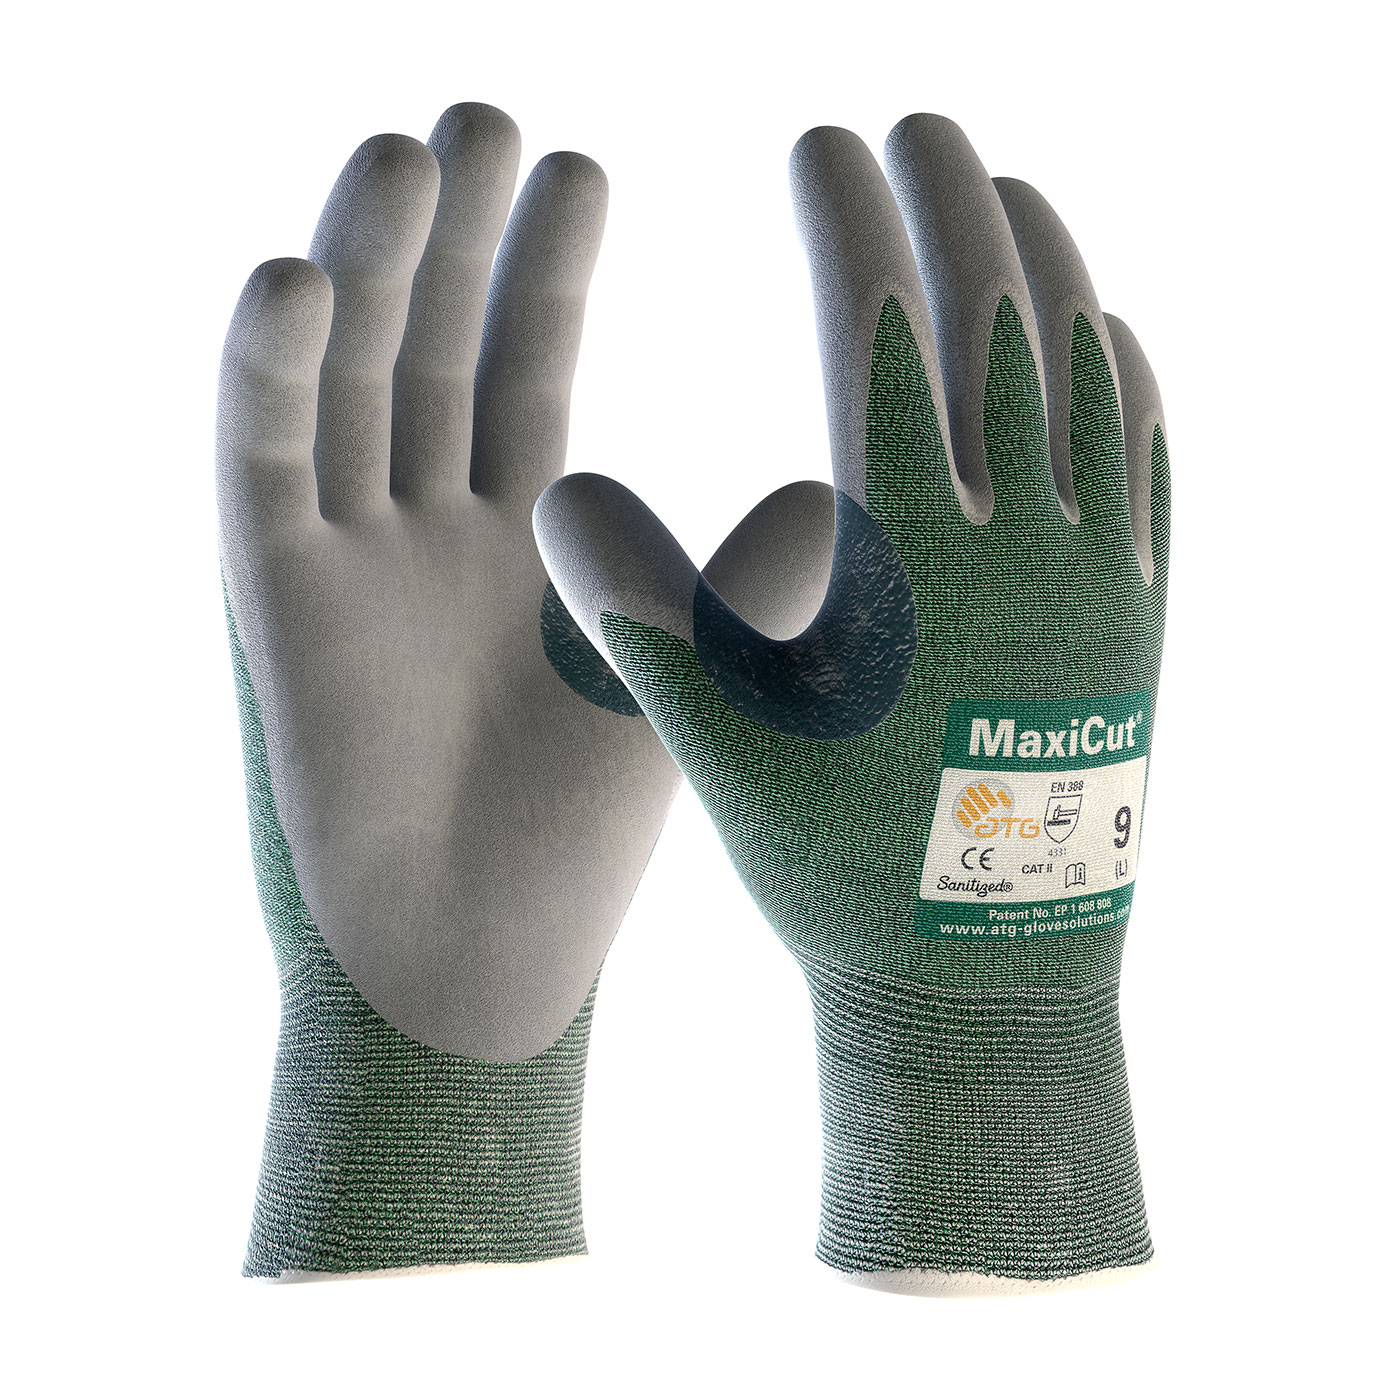 PIP 18-570/L MaxiCut Seamless Knit Engineered Yarn Glove with Nitrile Coated MicroFoam Grip on Palm & Fingers - Large PID-18570L